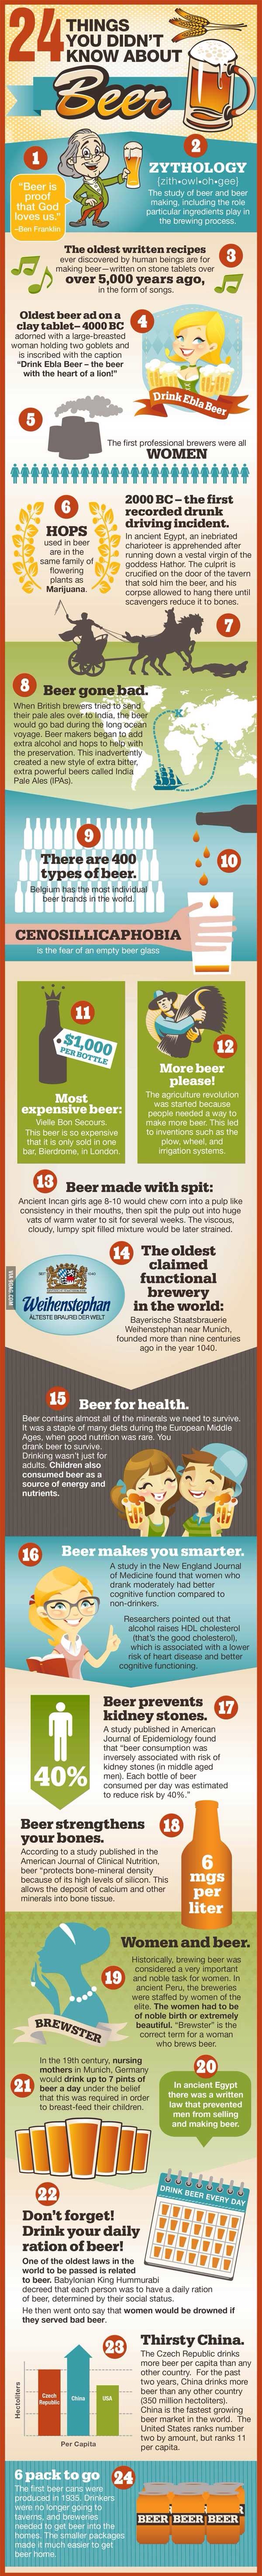 BeerFacts